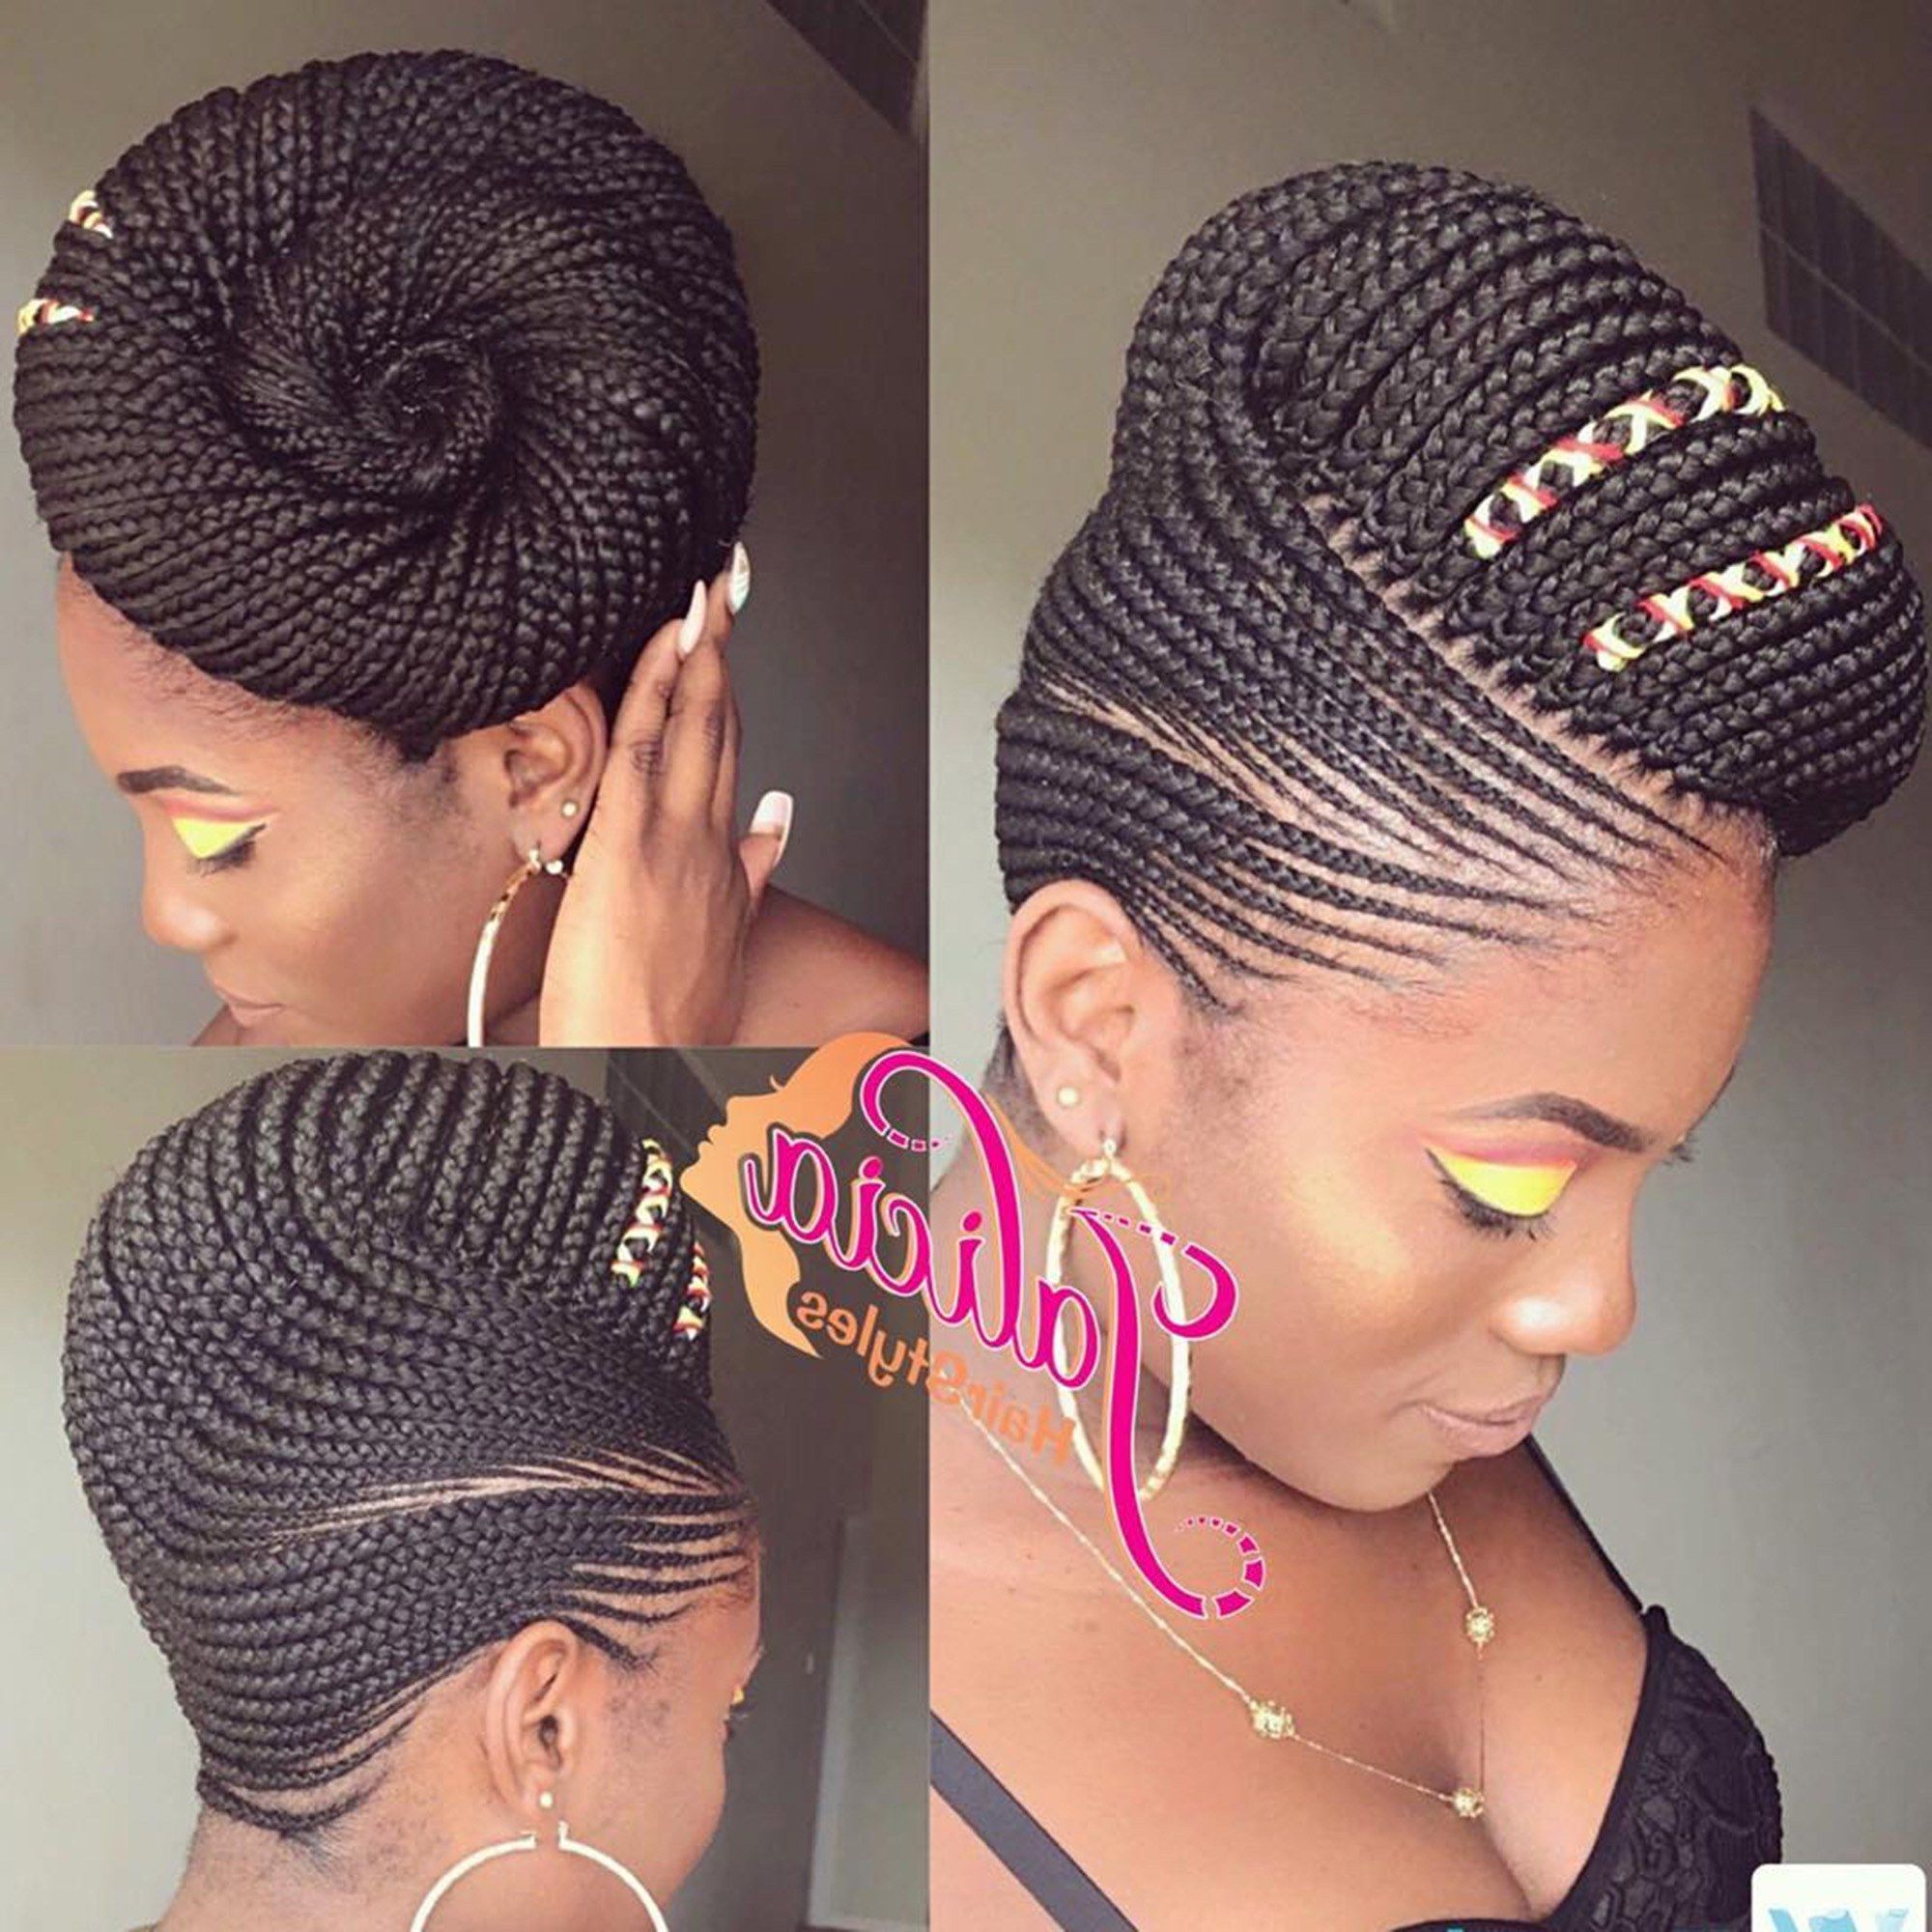 Widely Used Braided Crown Hairstyles With Bright Beads With Regard To 31 Best Black Braided Hairstyles To Try In 2019 (Gallery 18 of 20)